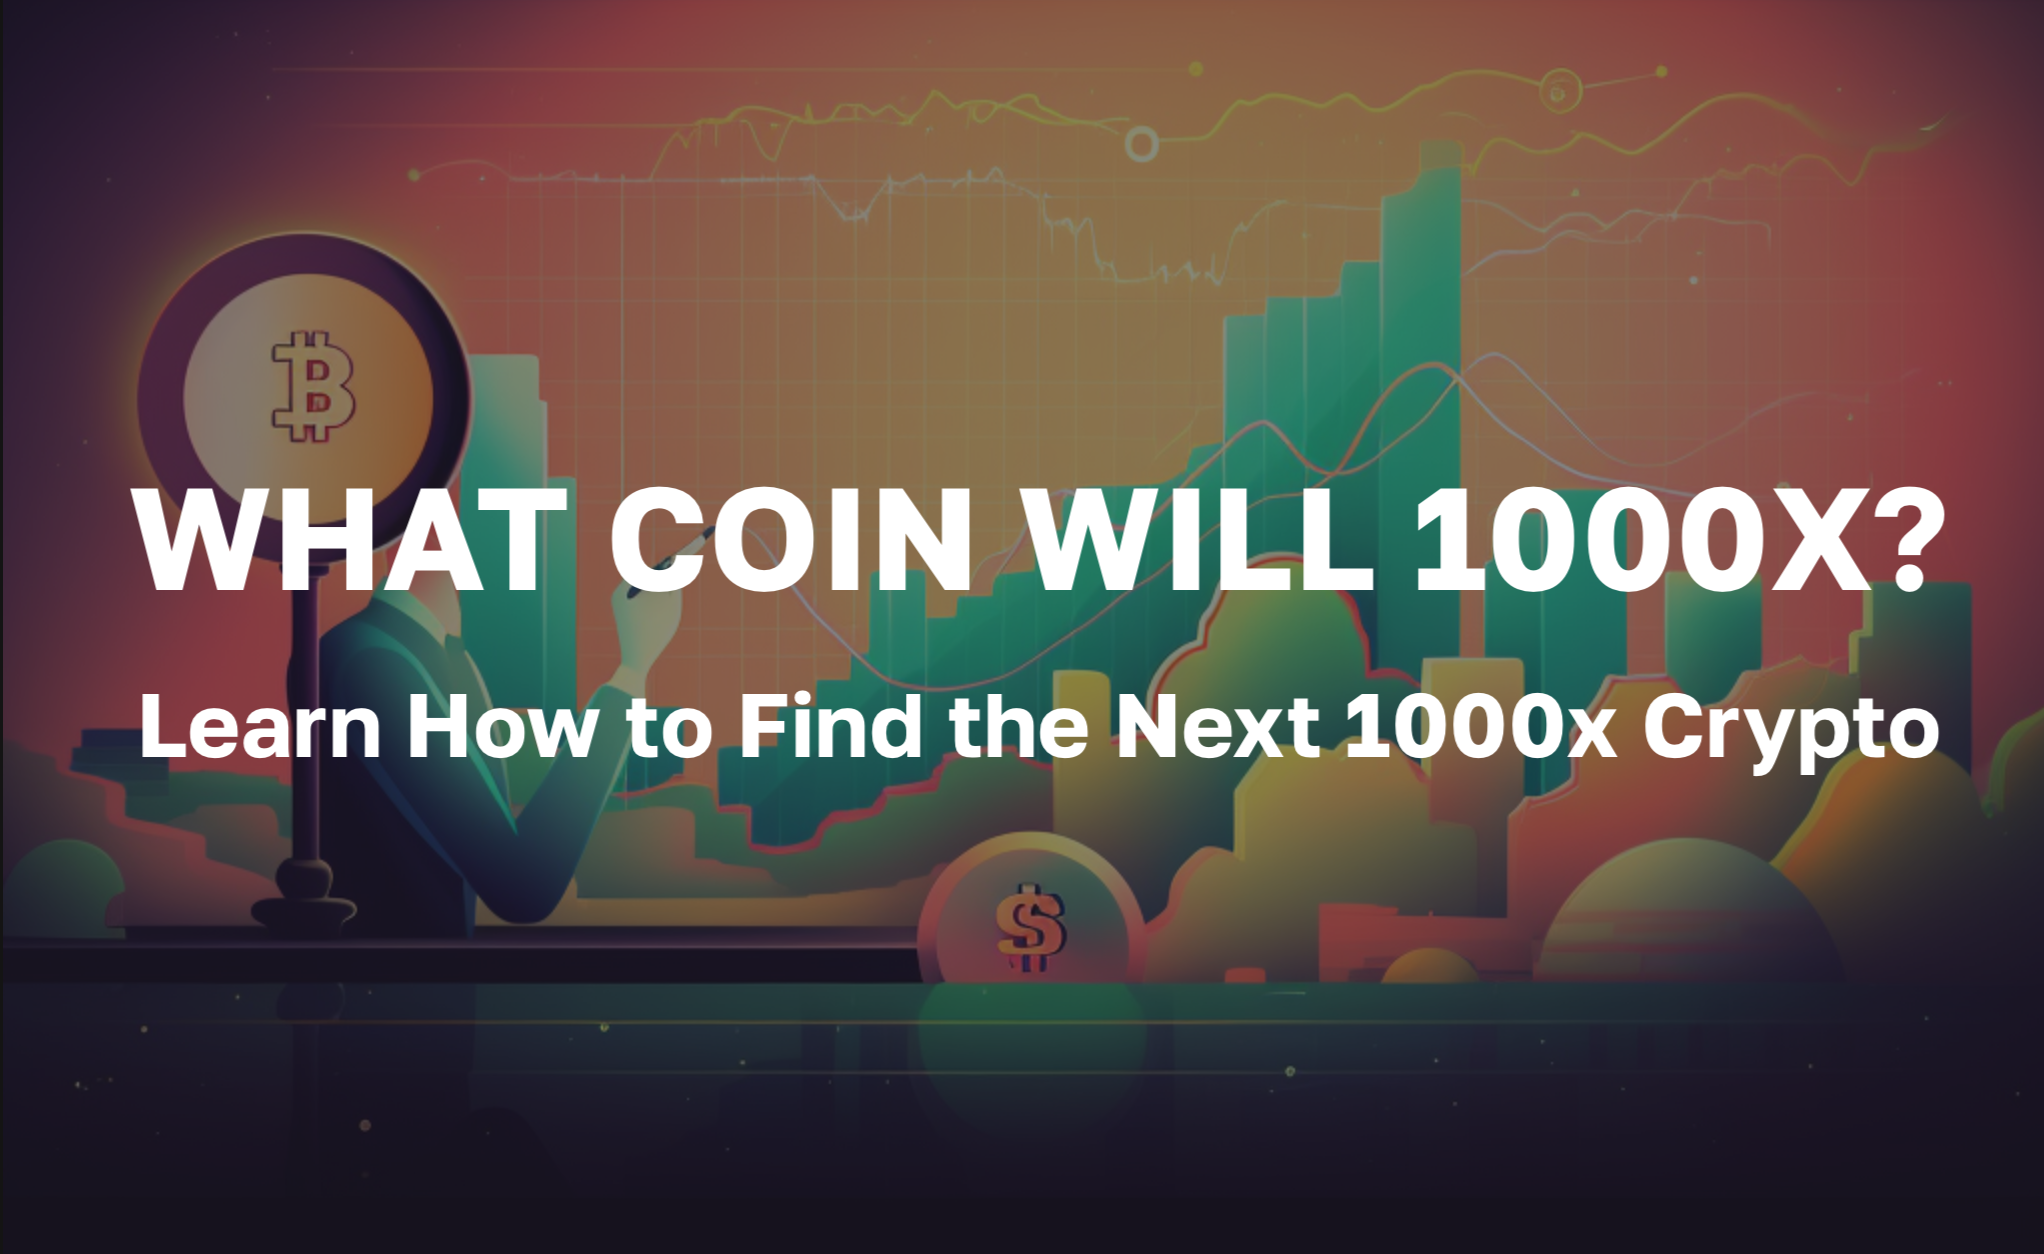 What Coin Will 1000x? Learn How to Find the Next 1000x Crypto